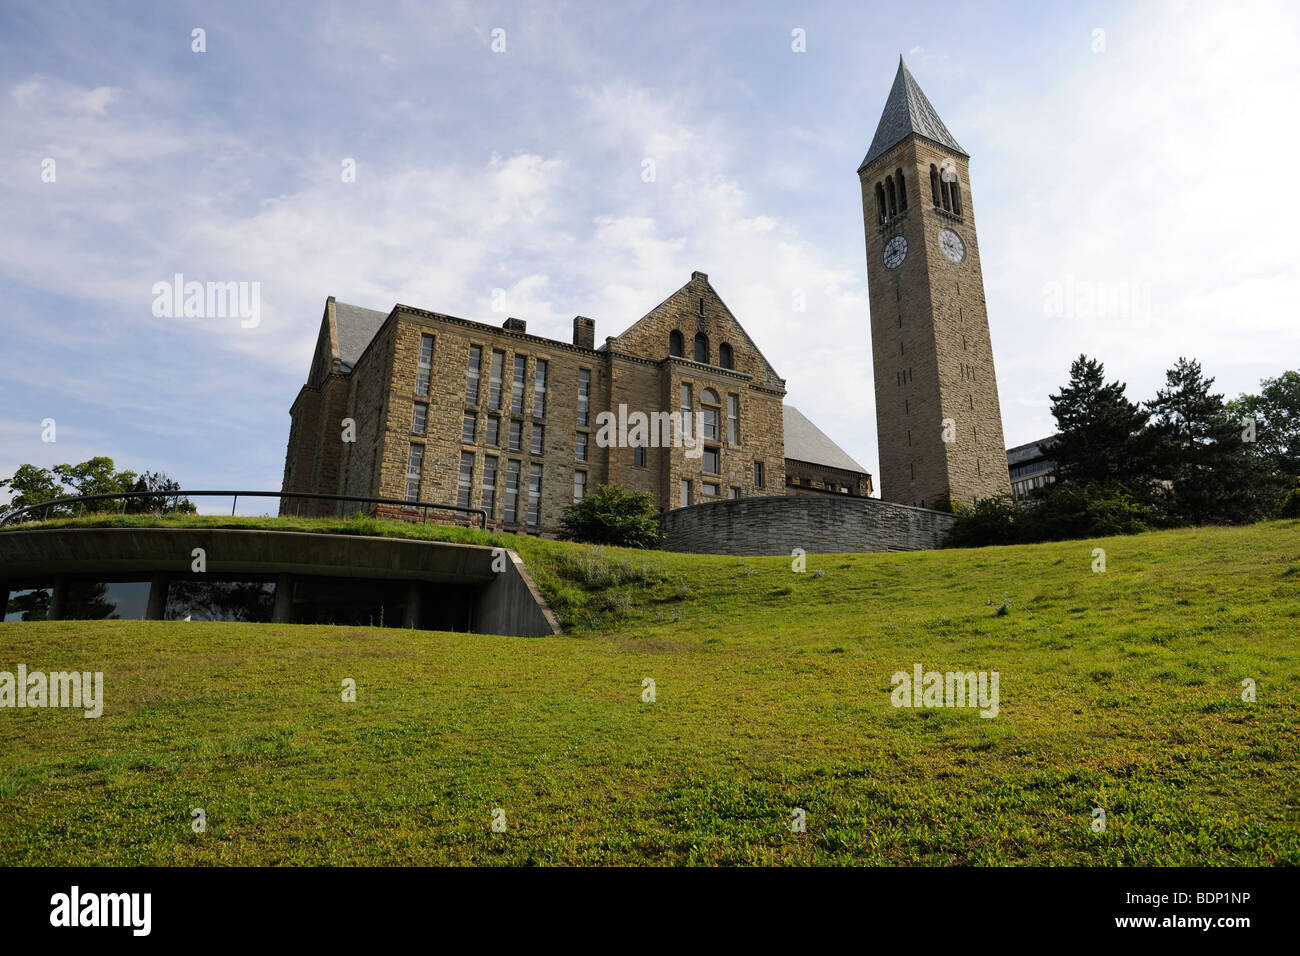 Cornell University, McGraw Tower and Uris Library. Stock Photo